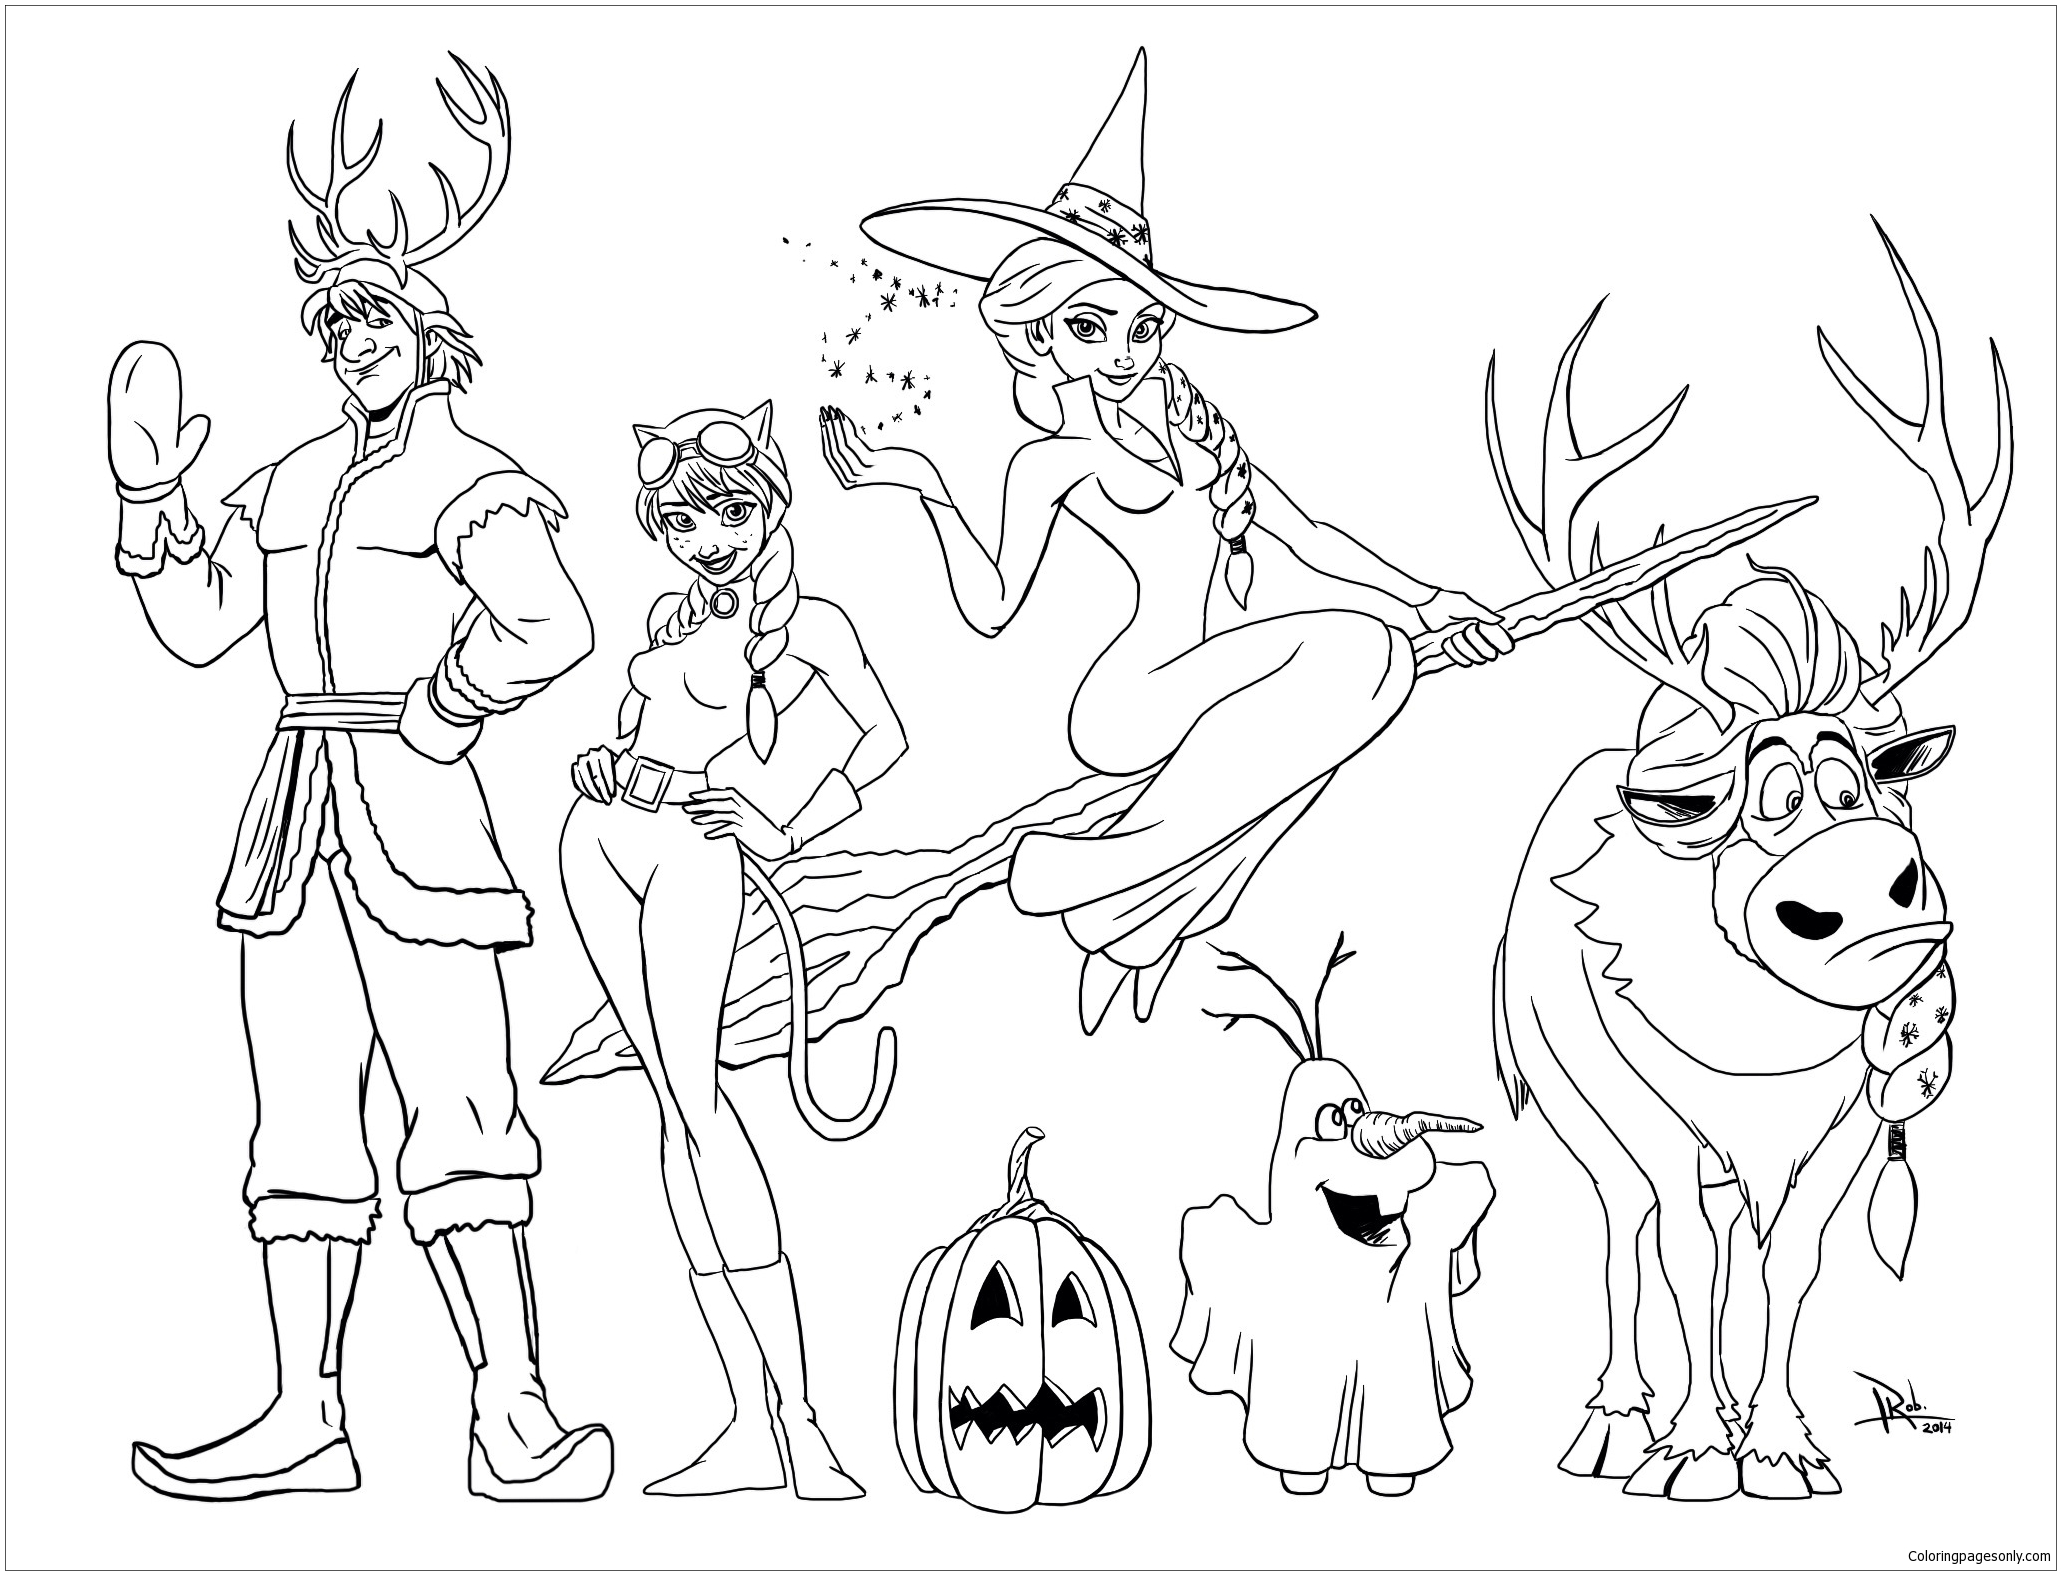 Frozen Halloween Coloring Pages   Halloween Coloring Pages ...